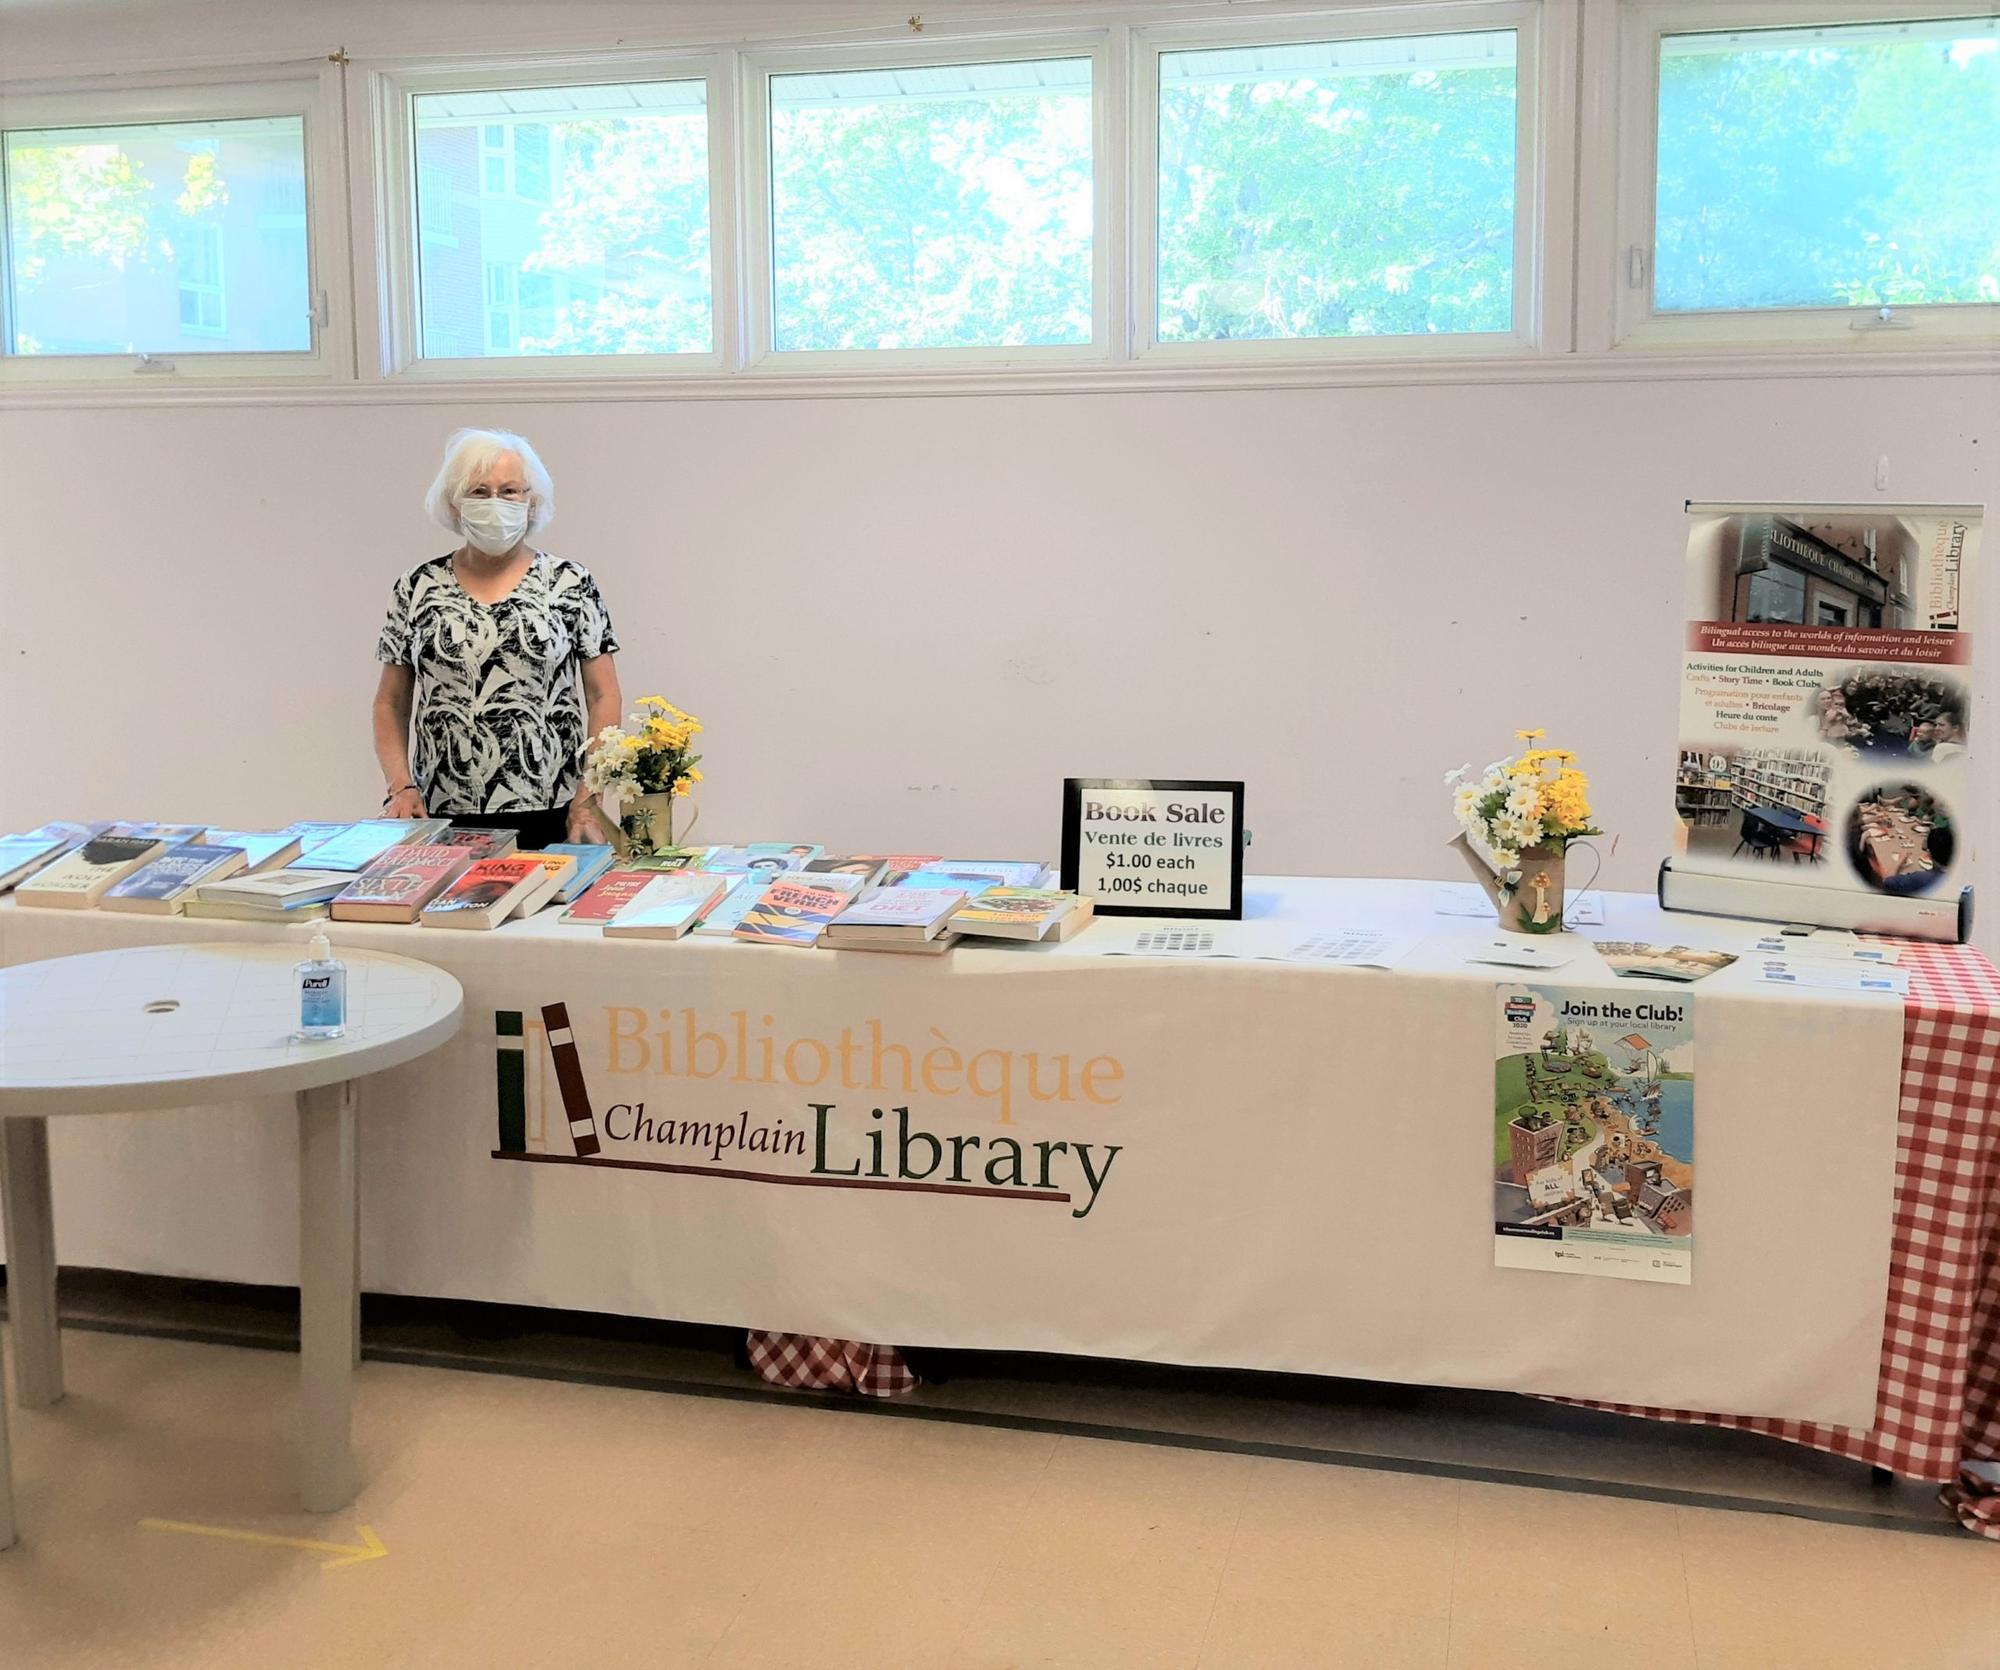 Visit the Champlain Library at the Market